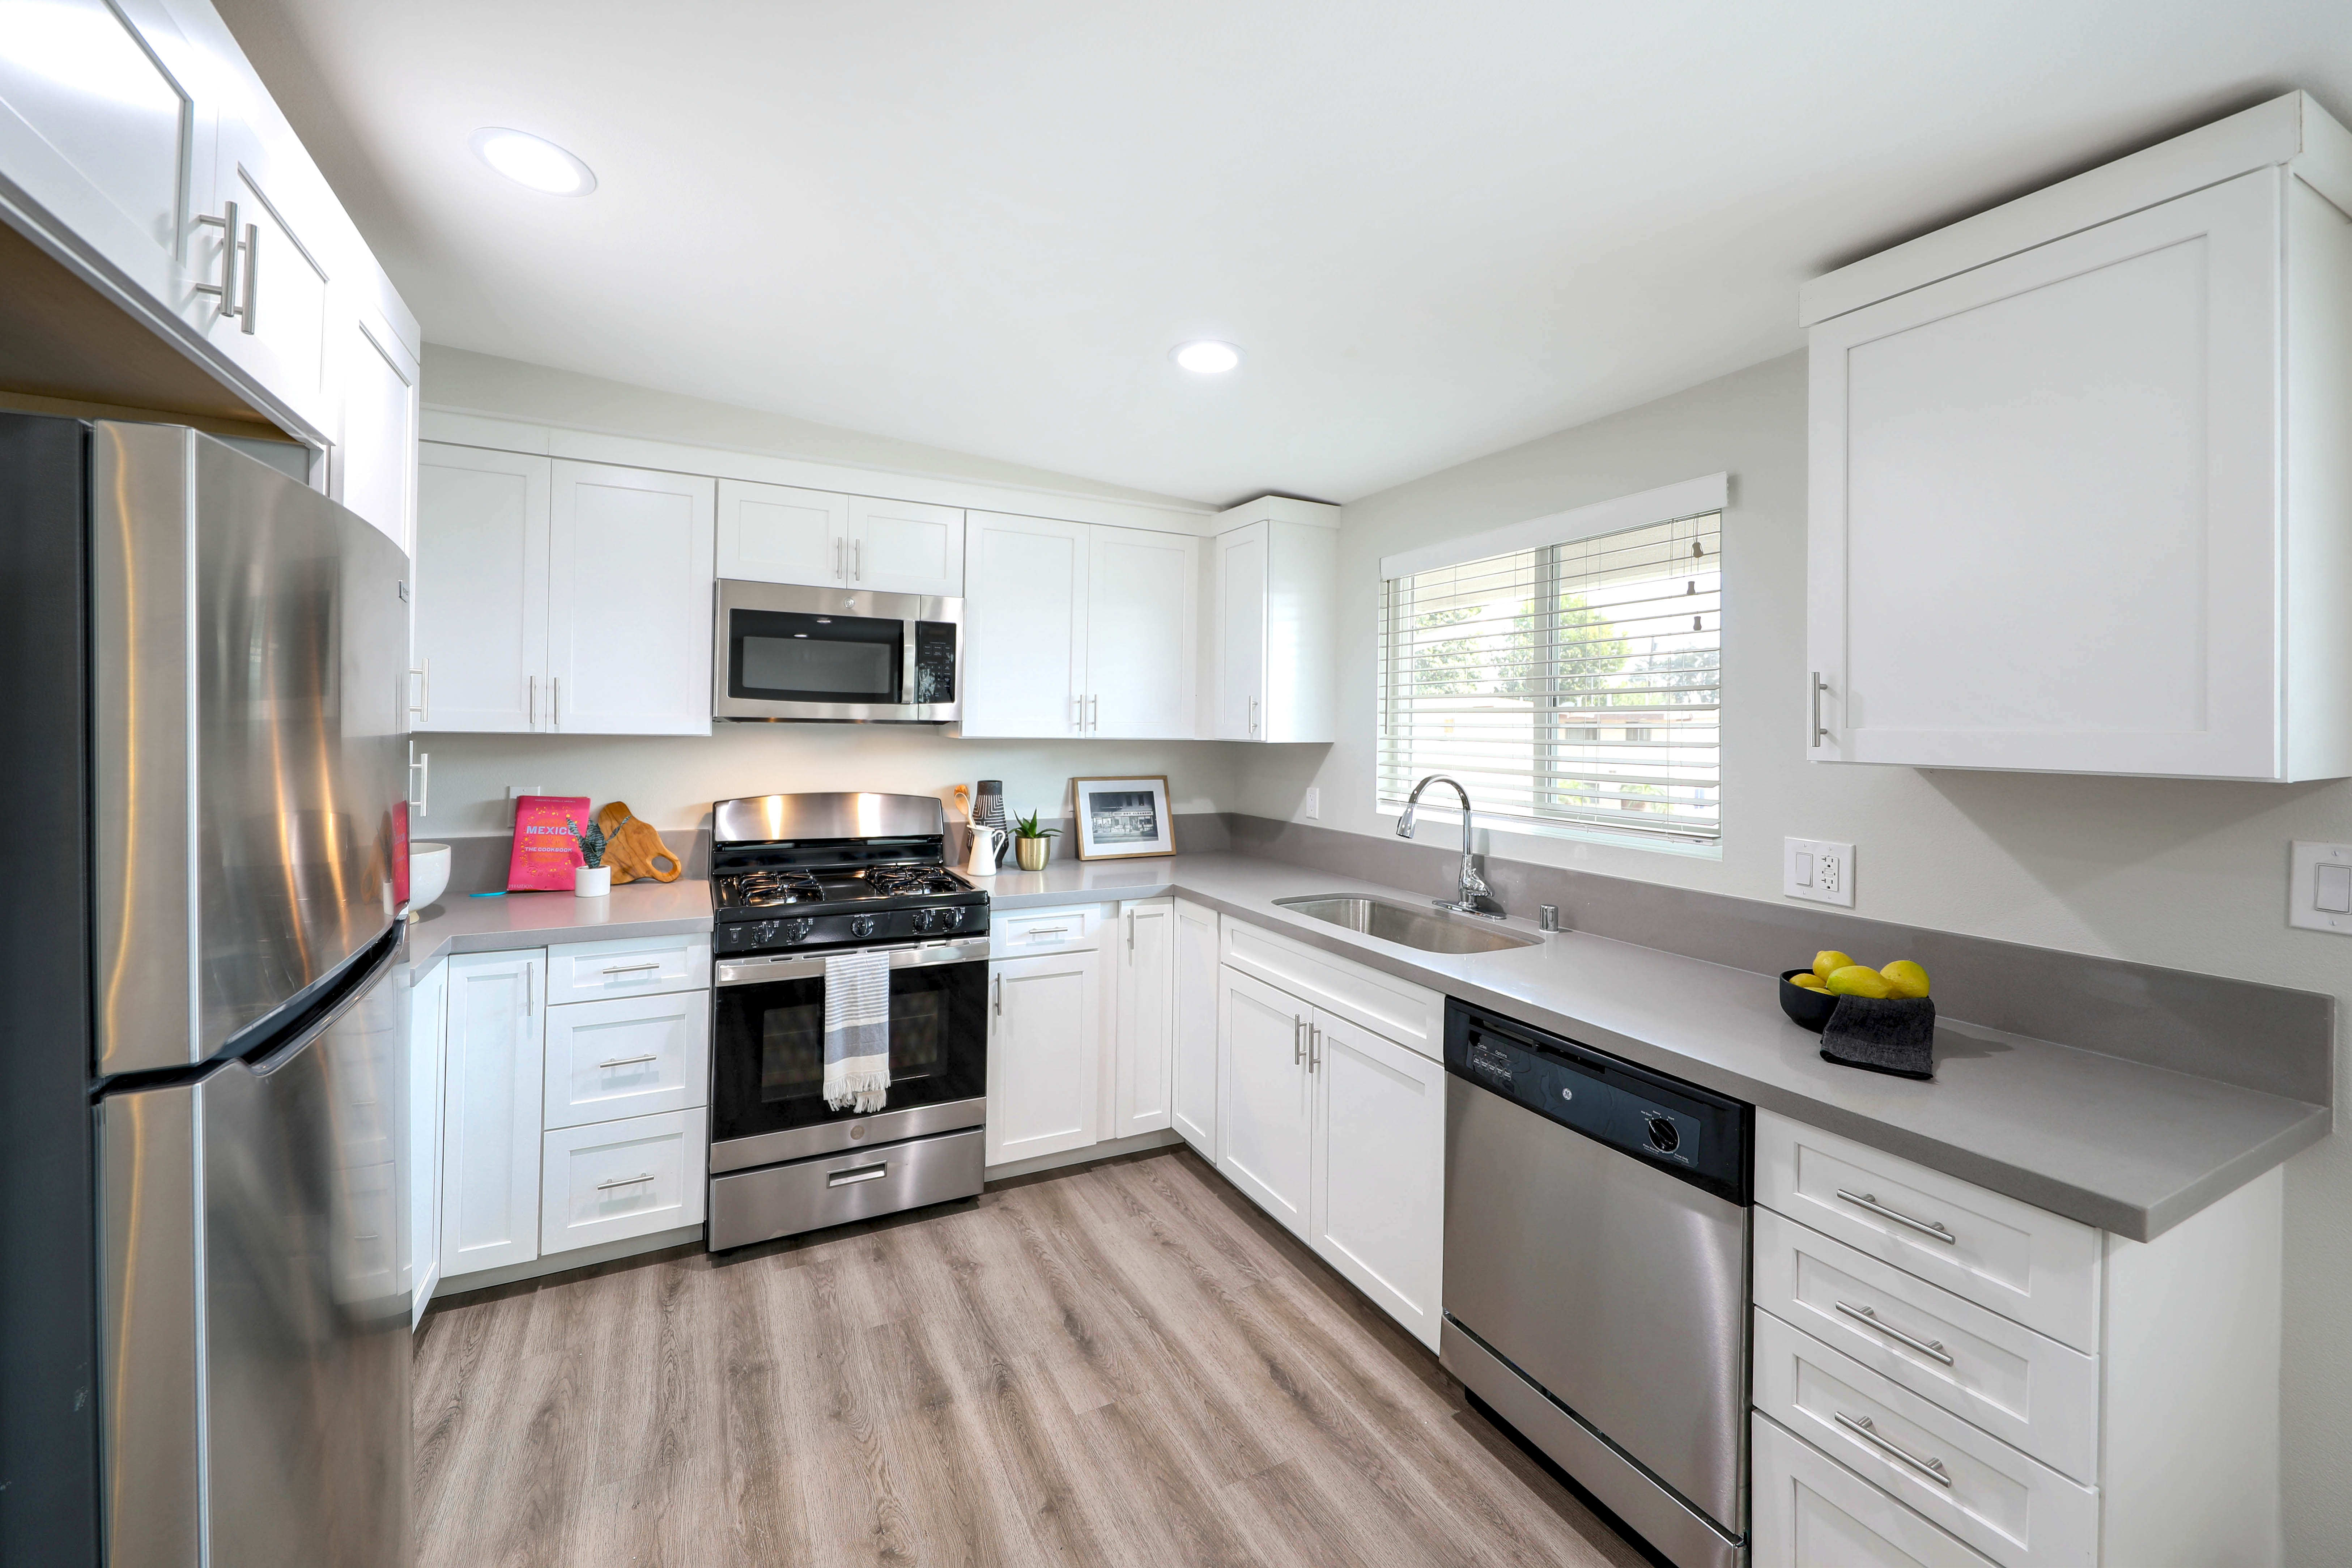 Stainless-steel appliances in a bright kitchen at Pacific West Villas in Westminster, California